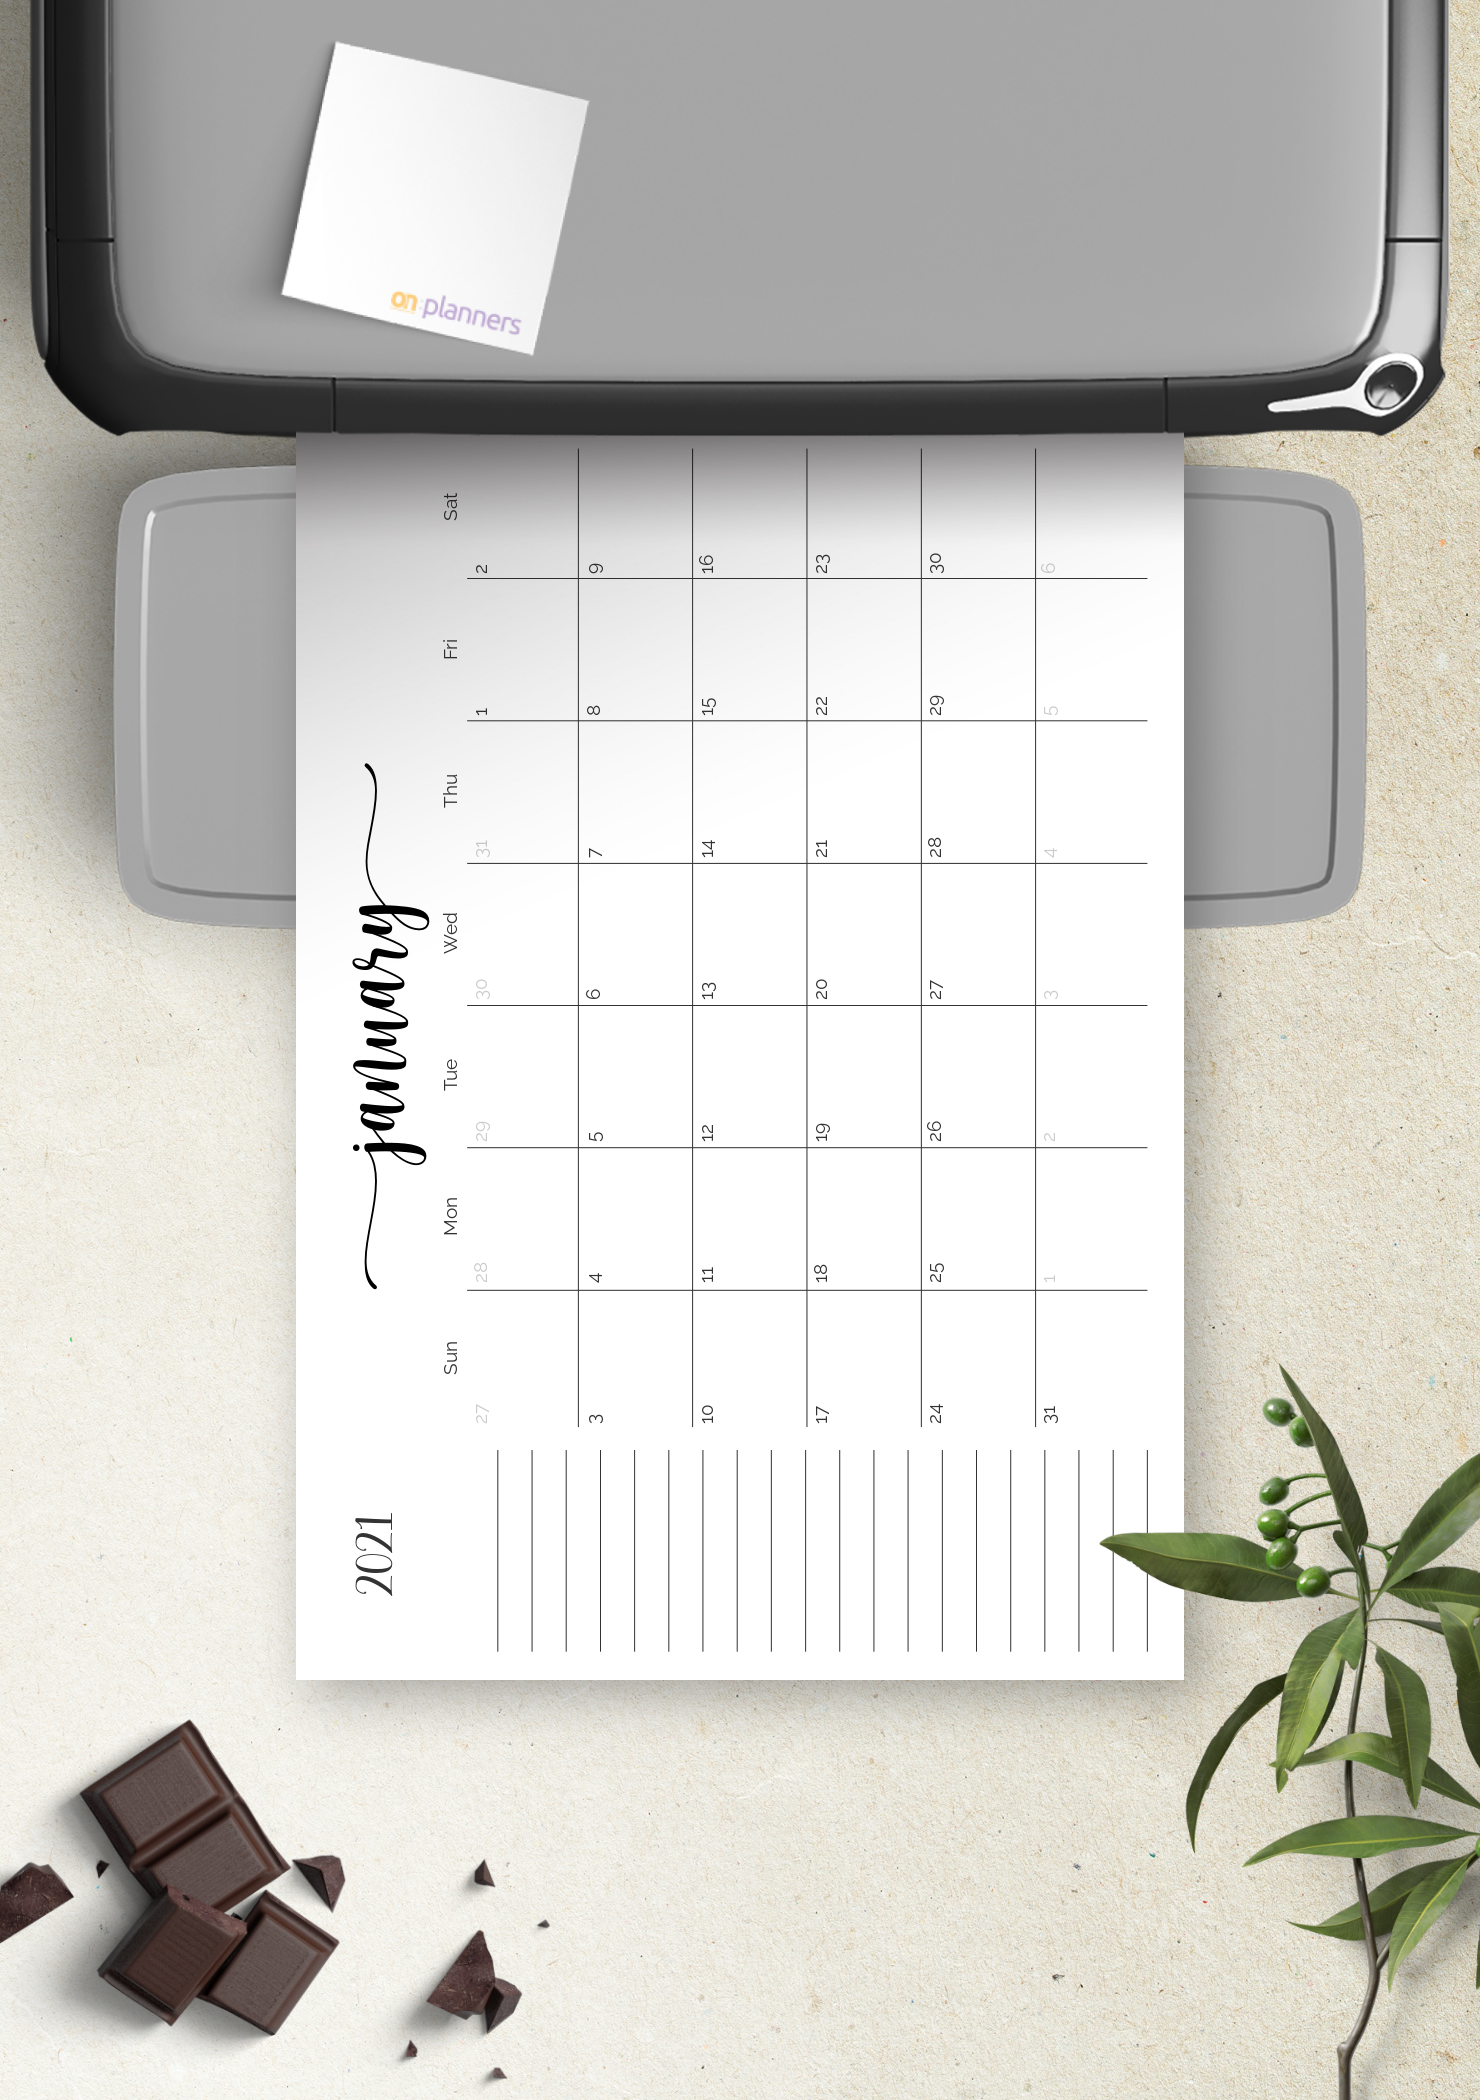 Download Printable Monthly Calendar with Notes Section PDF